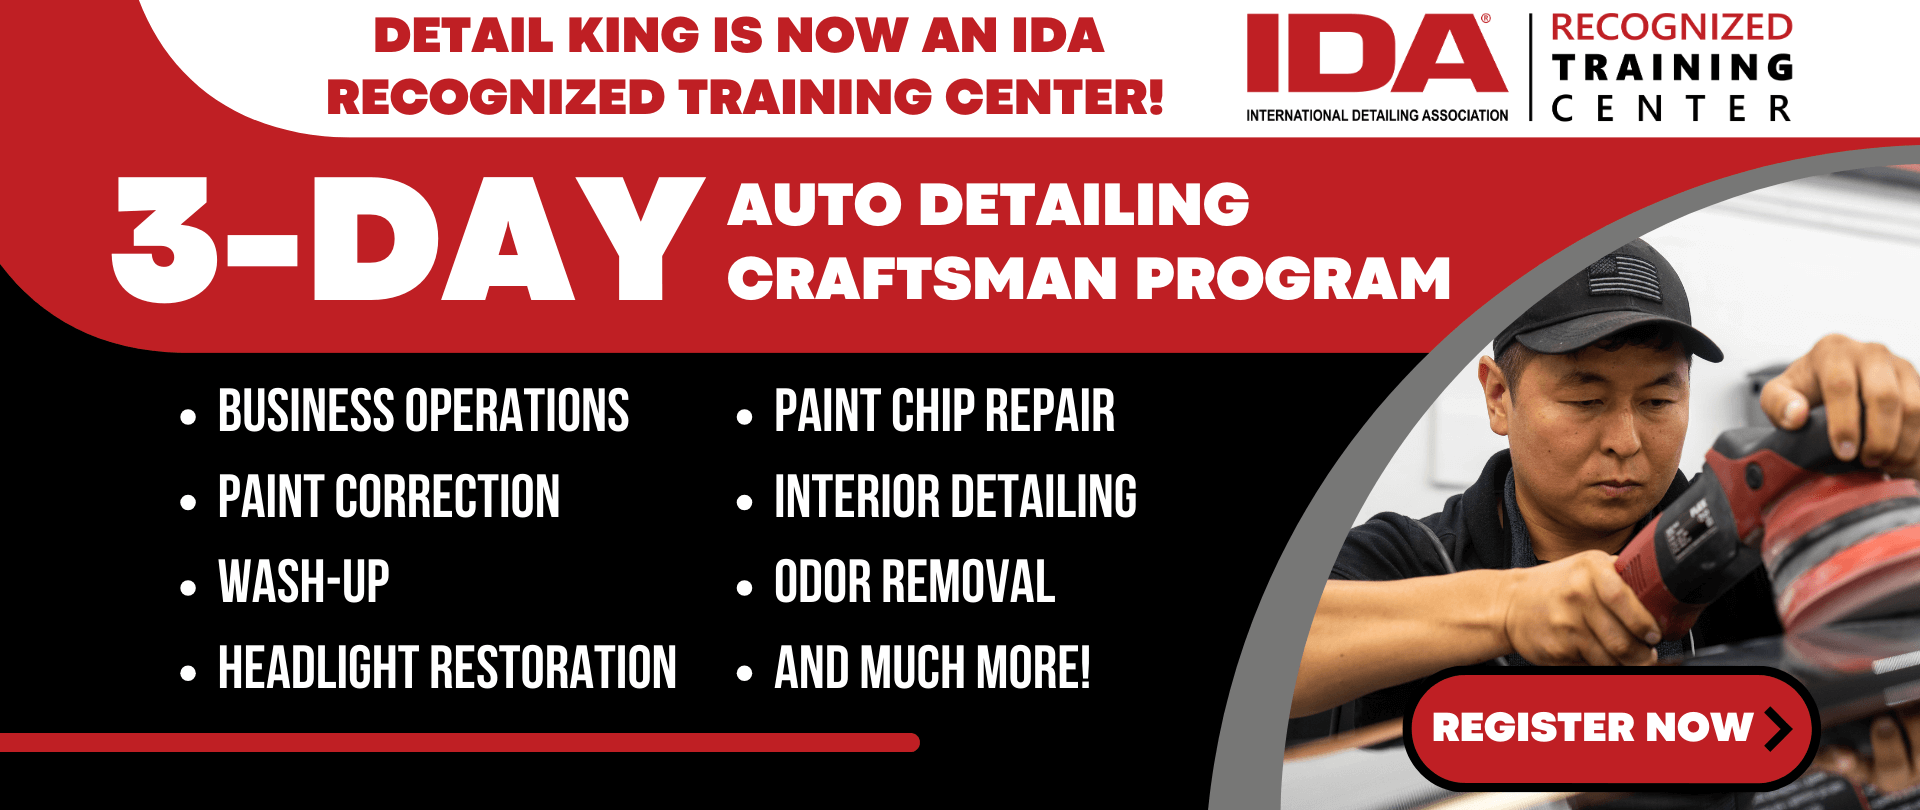 Detail King is now Recognized as an IDA Certified Training Center